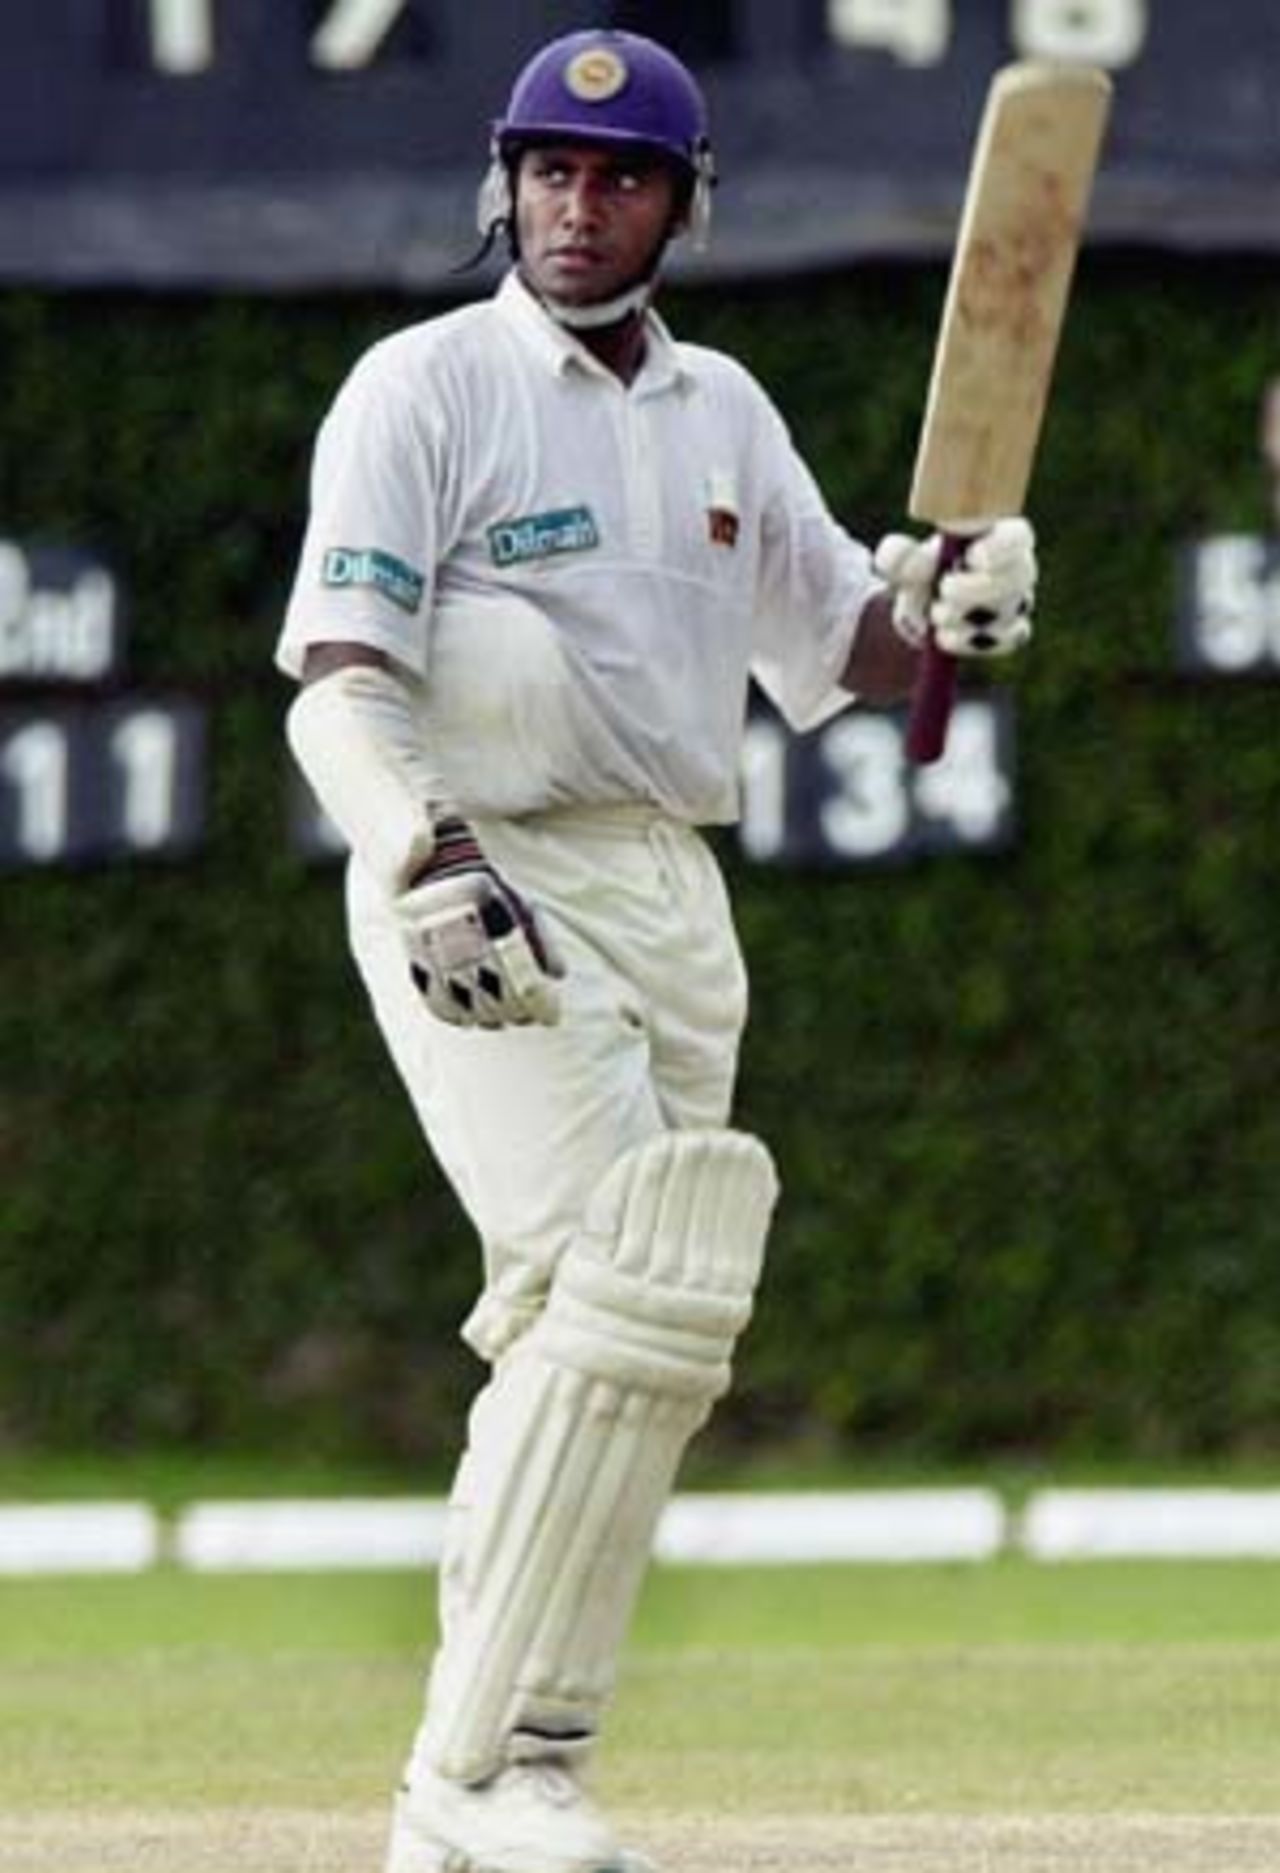 Hashan Tillakaratne raises his bat to acknowledge cheers from the crowd on reaching his half century at Colombo, 27 April 2003